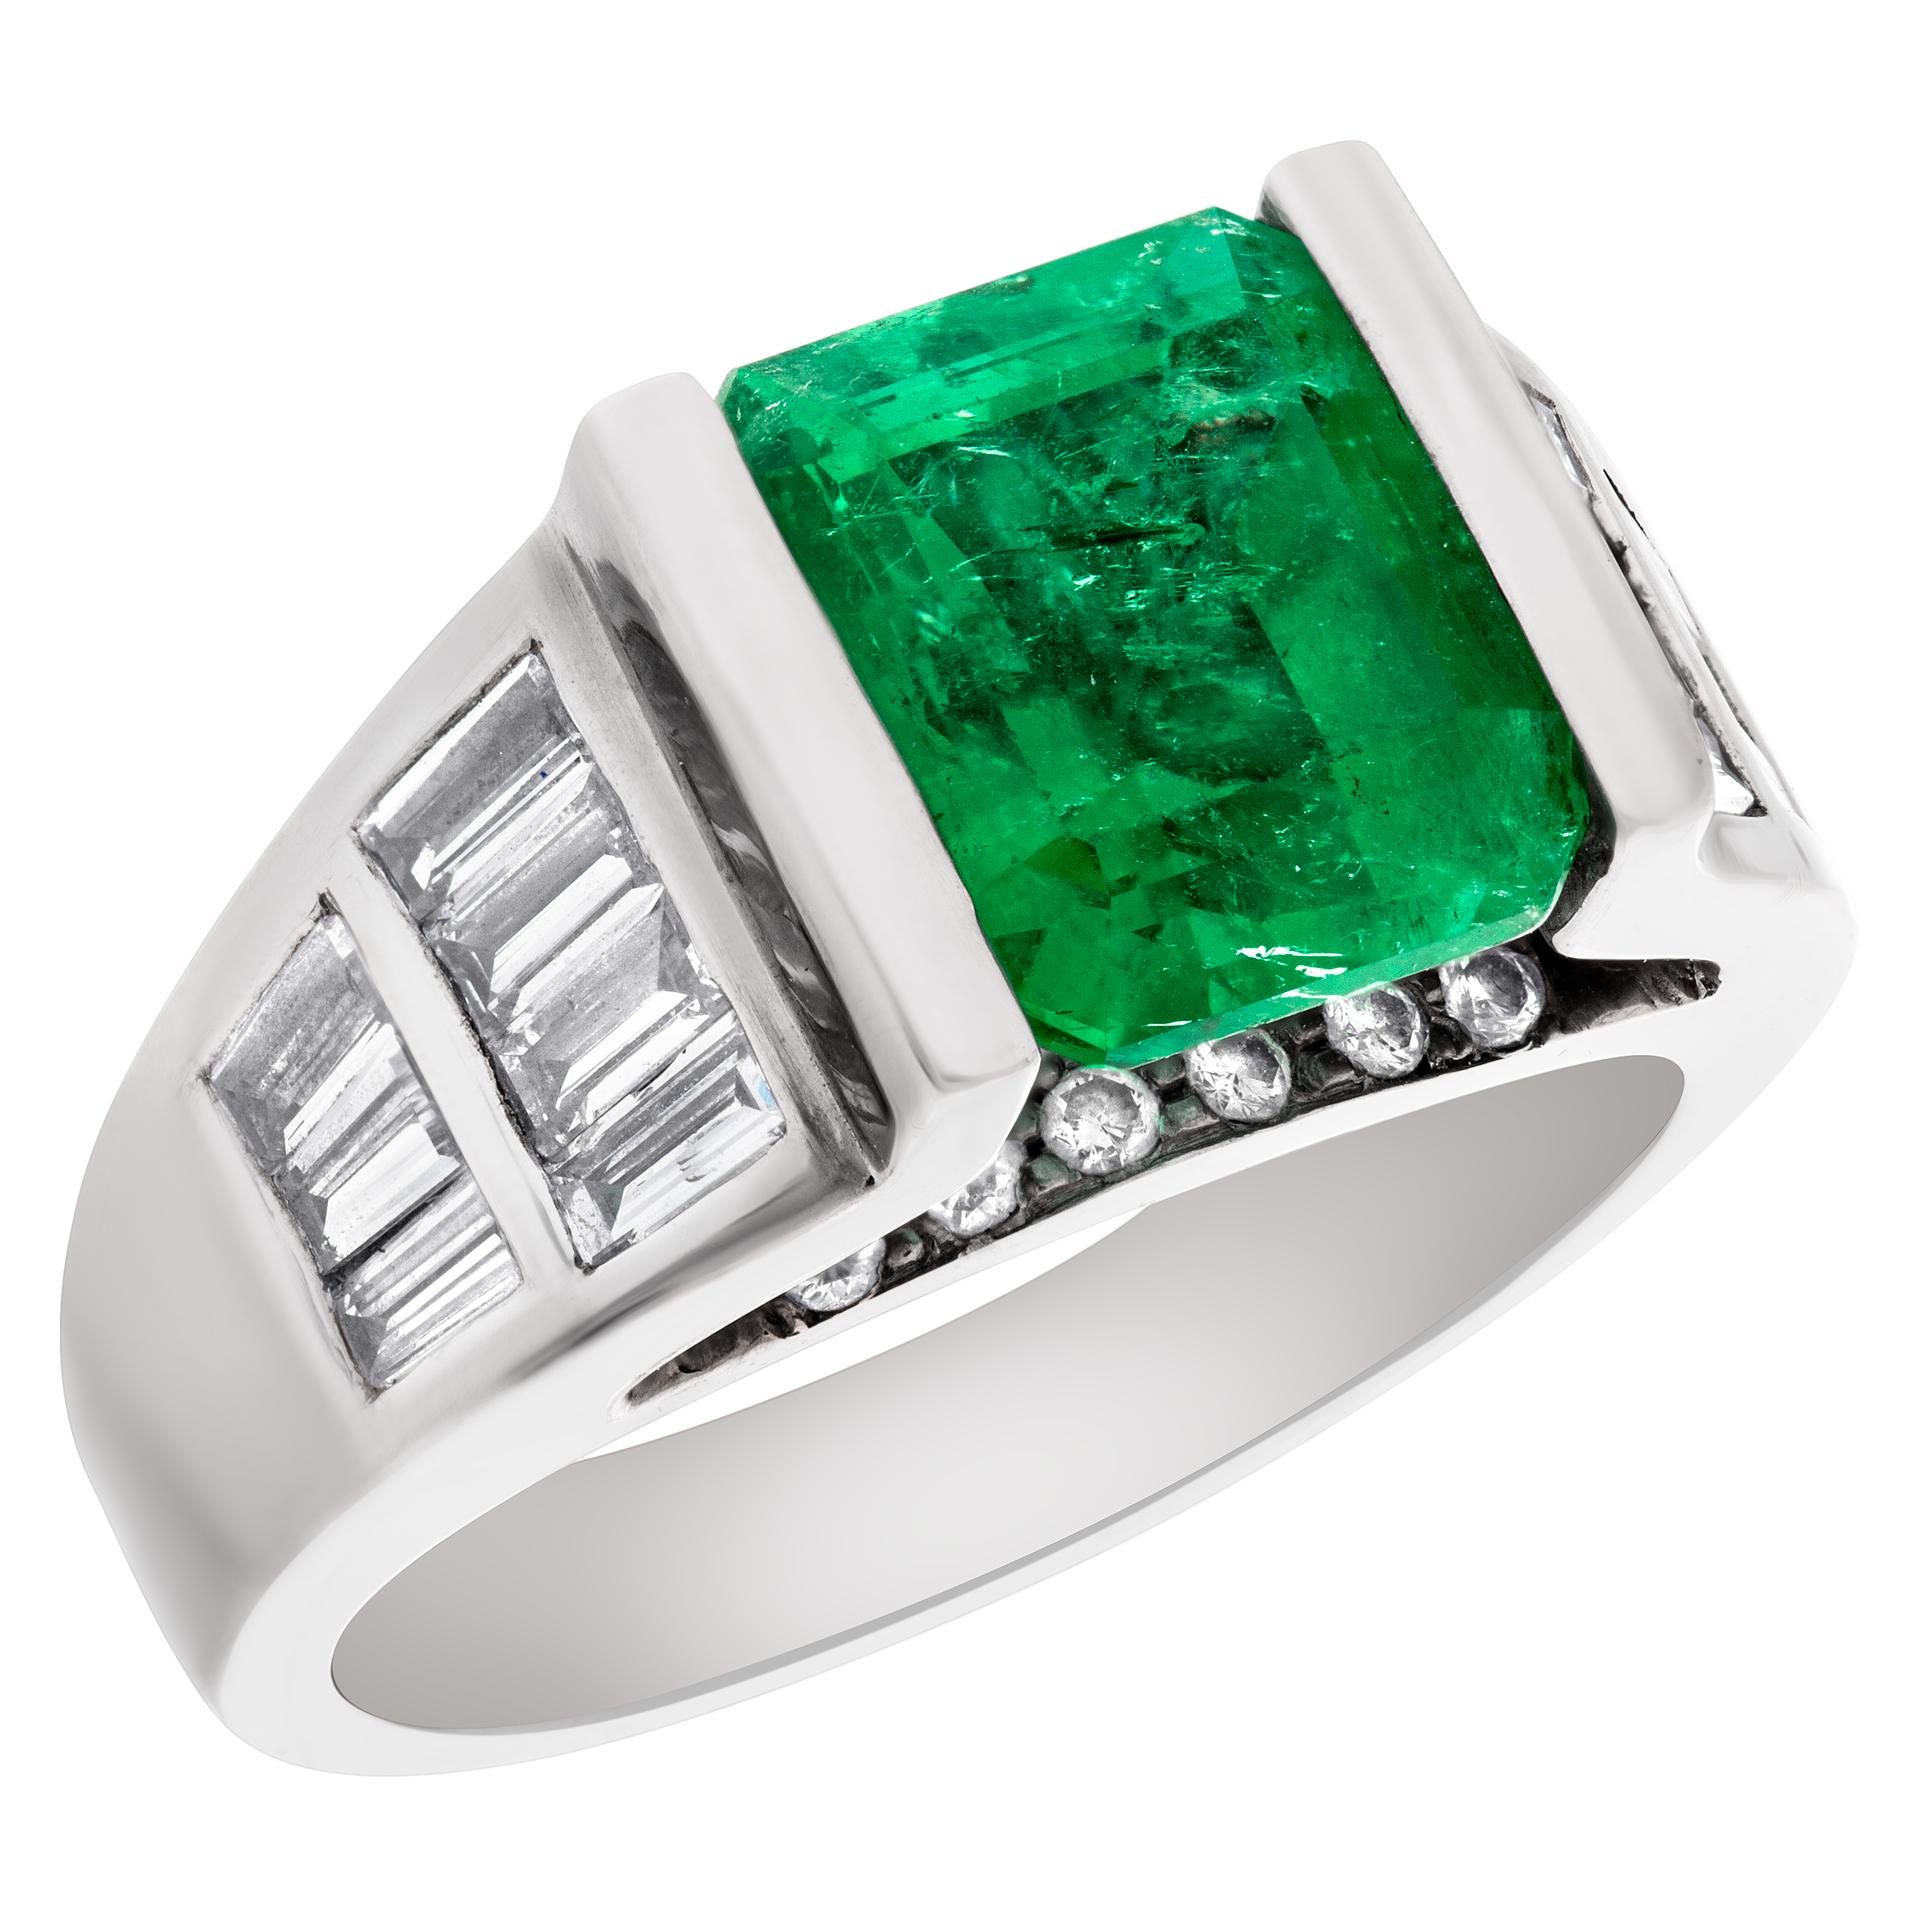 Contemporary Emerald Ring in 14k White Gold with Diamonds